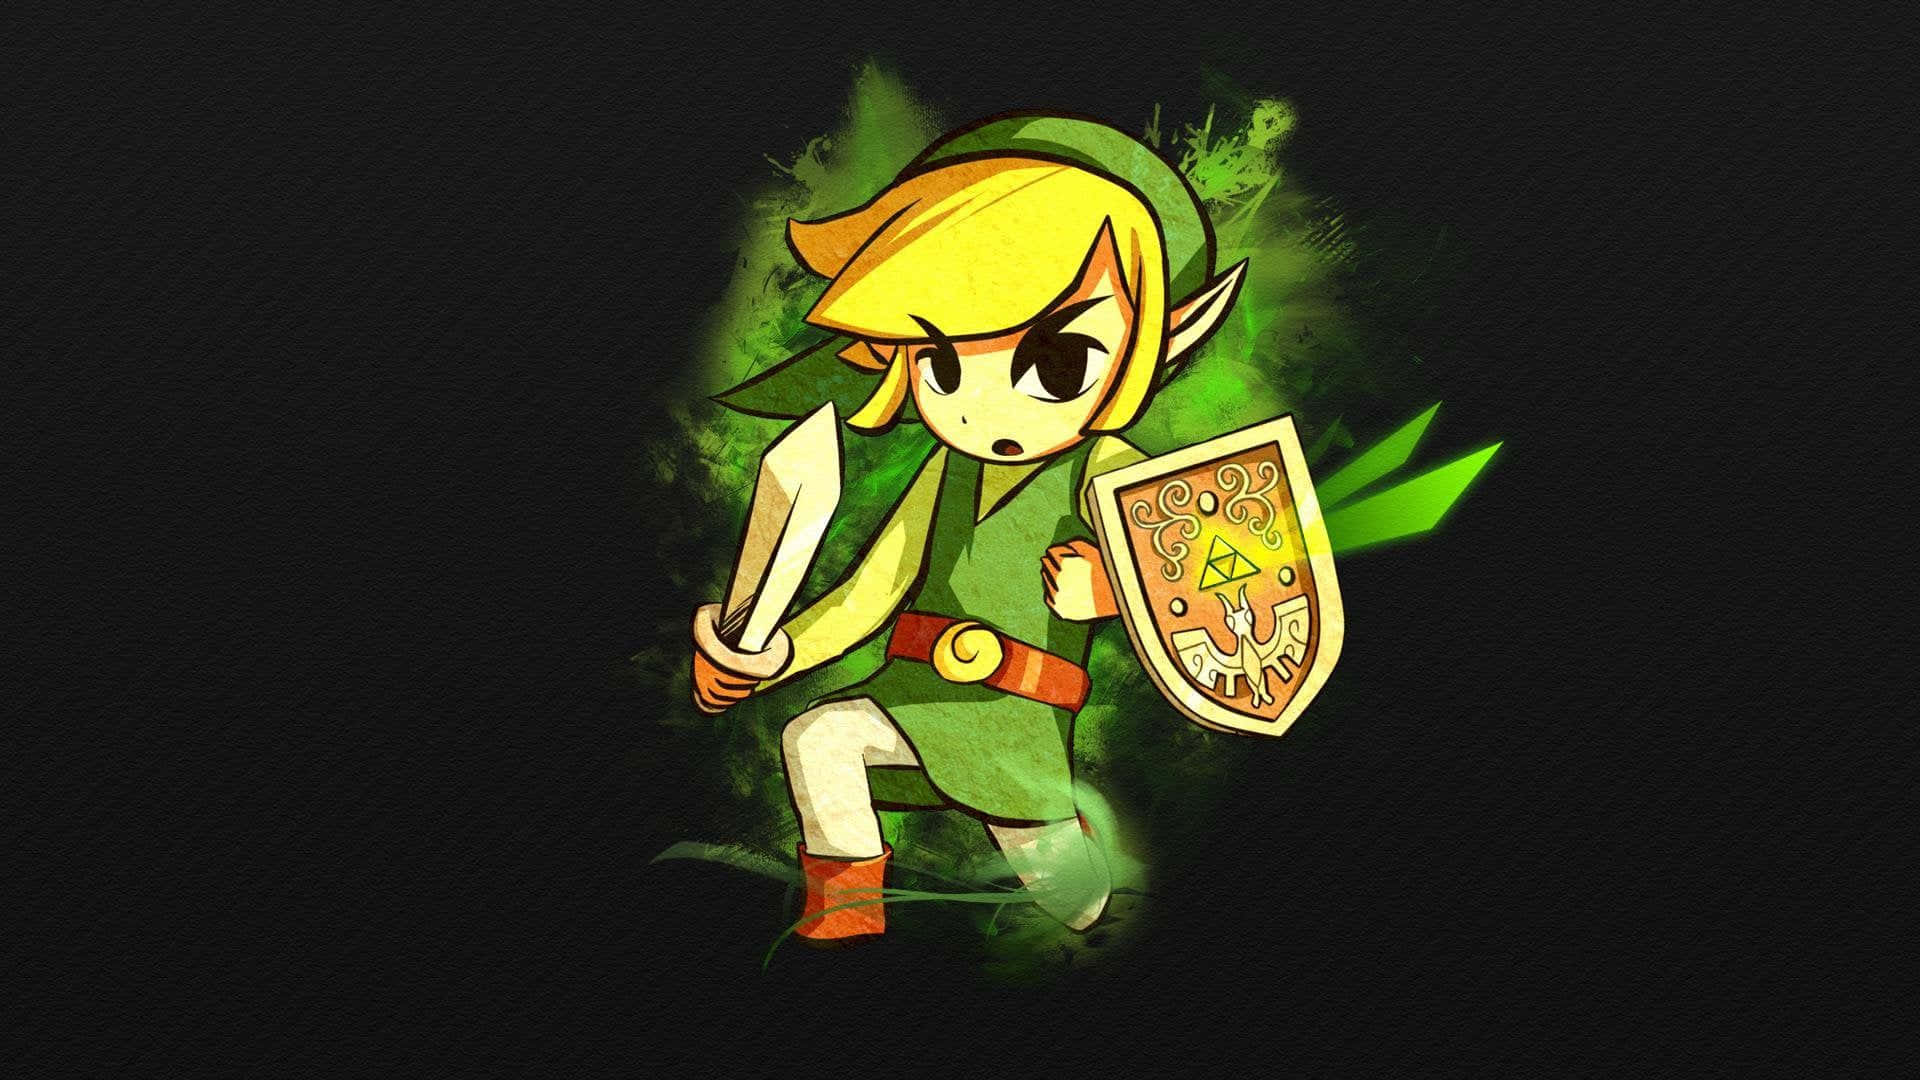 The Legend of Zelda: The Wind Waker featuring Link sailing on open seas Wallpaper